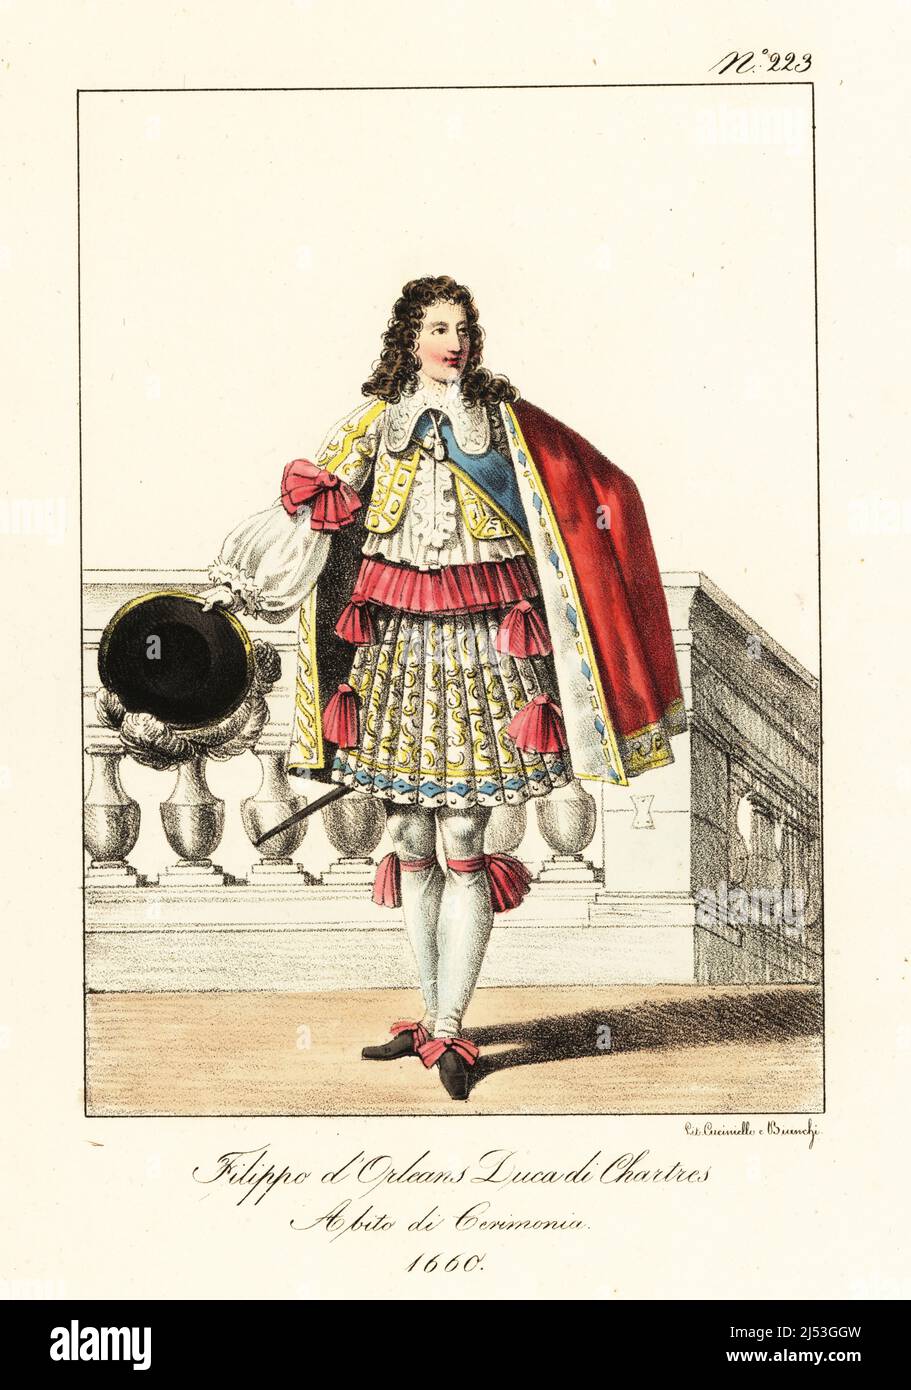 Philippe I, Duke of Orléans, in ceremonial robes, 1660. In scarlet cape, embroidered waistcoat and skirts, hose and garters, court sword. Younger brother of King Louis XIV of France. Philippe d'Orleans, Duc de Chartres. Costume de Ceremonie. Stock Photo